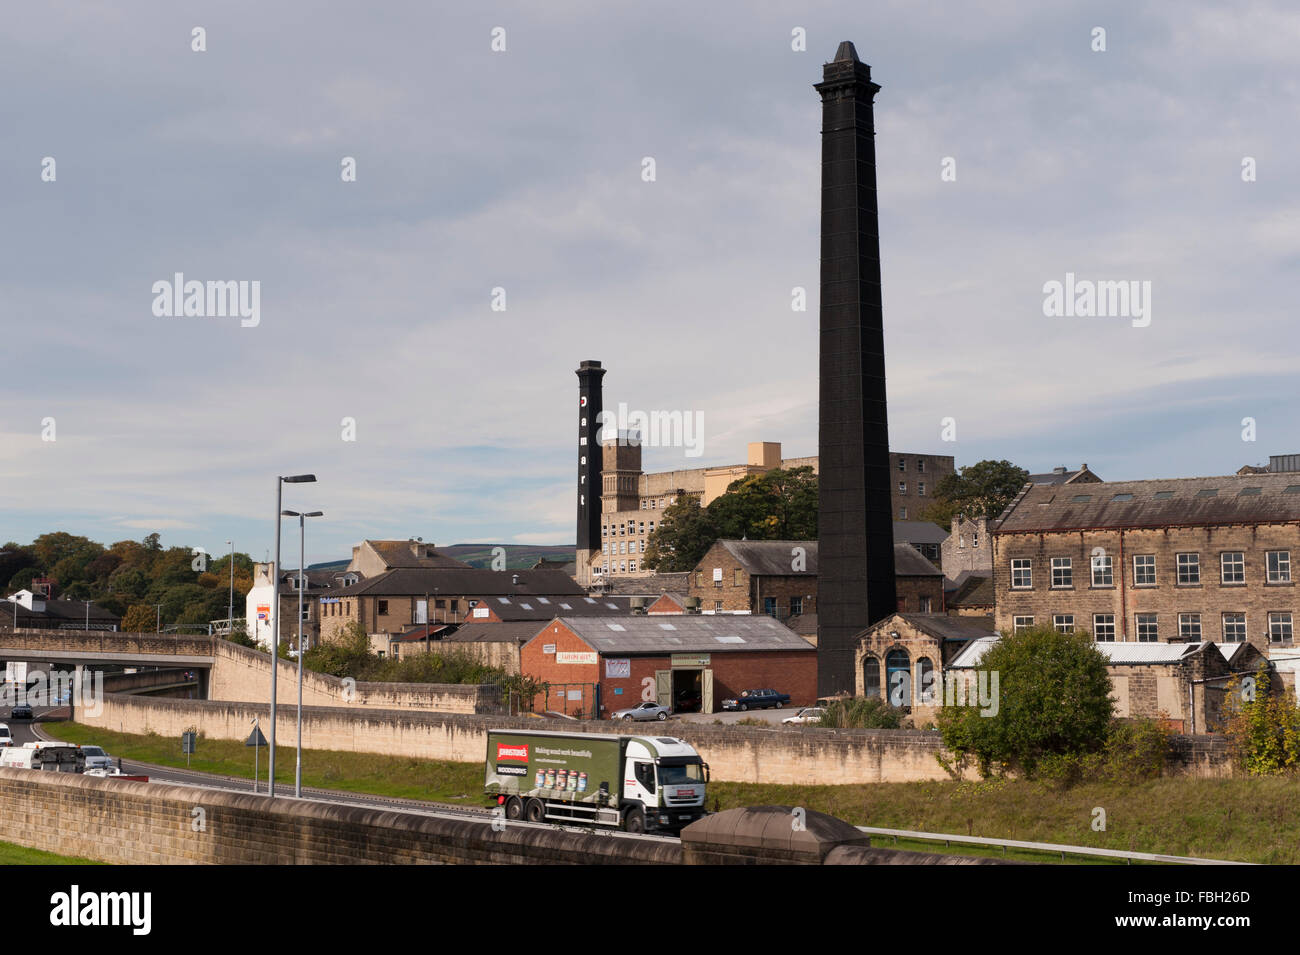 View across traffic on A650 Bingley Relief Road towards historic, tall black chimneys of 2 Victorian mills - one is the Damart  mill. England, GB, UK. Stock Photo